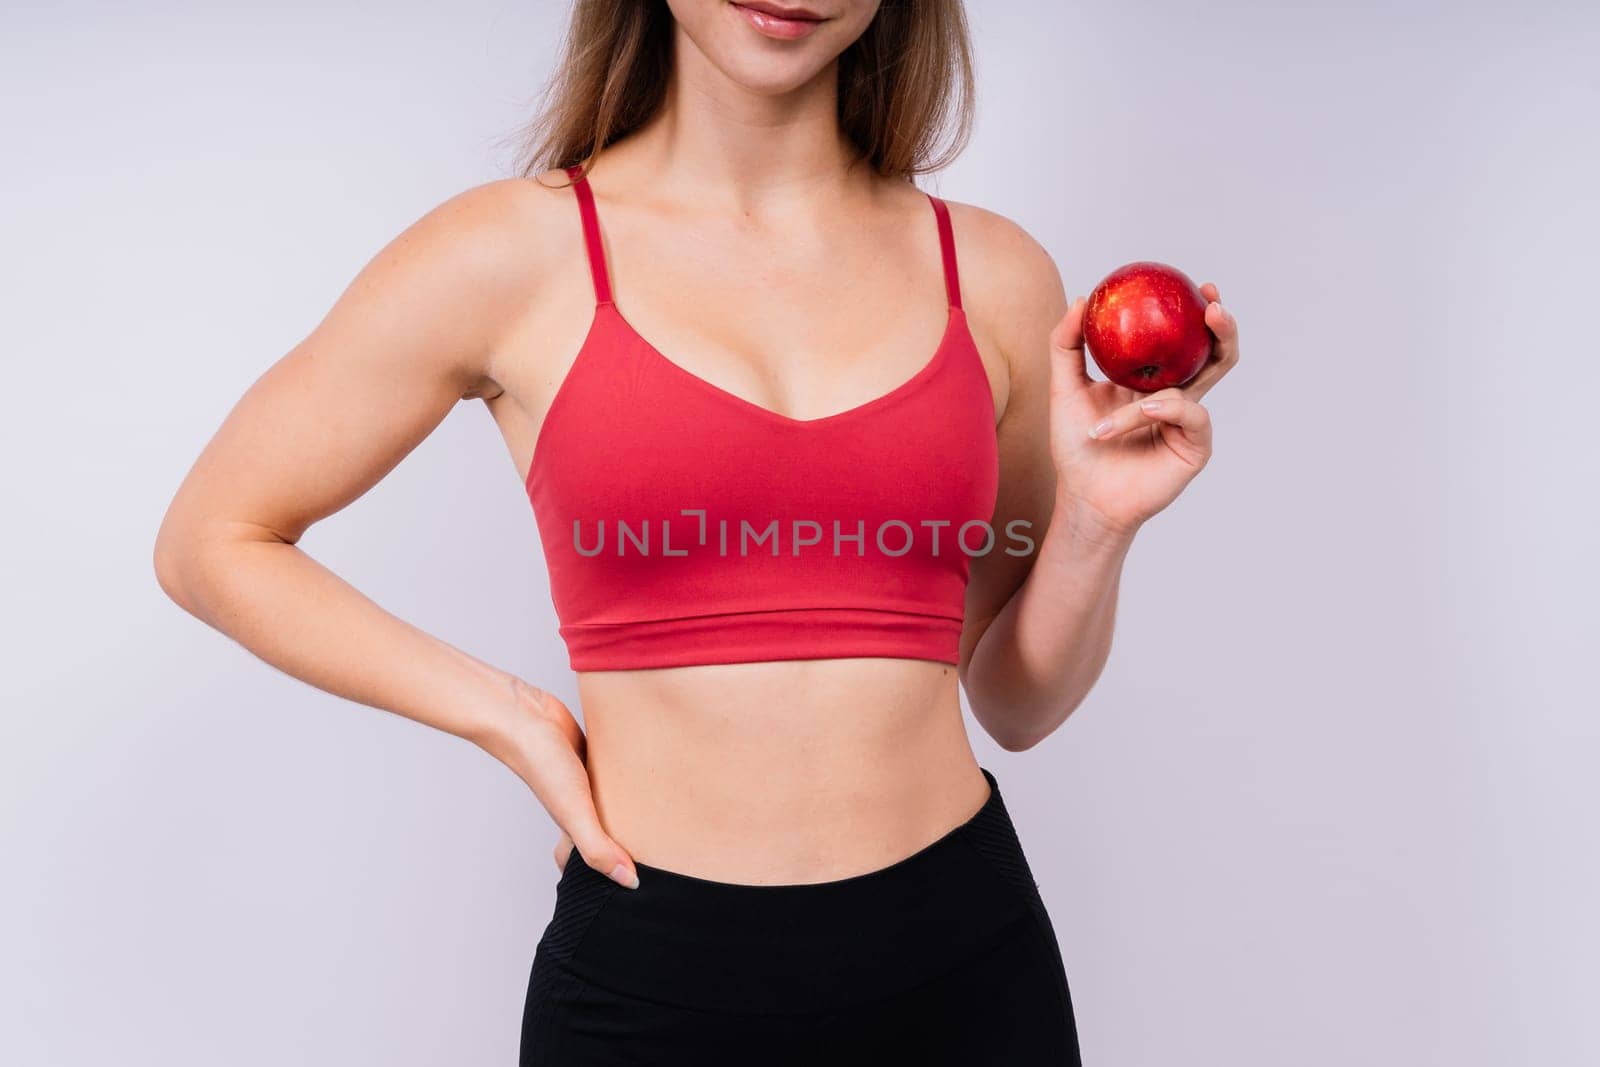 Cropped of sporty female with well fit body holding an apple, healthy food and fit body concept